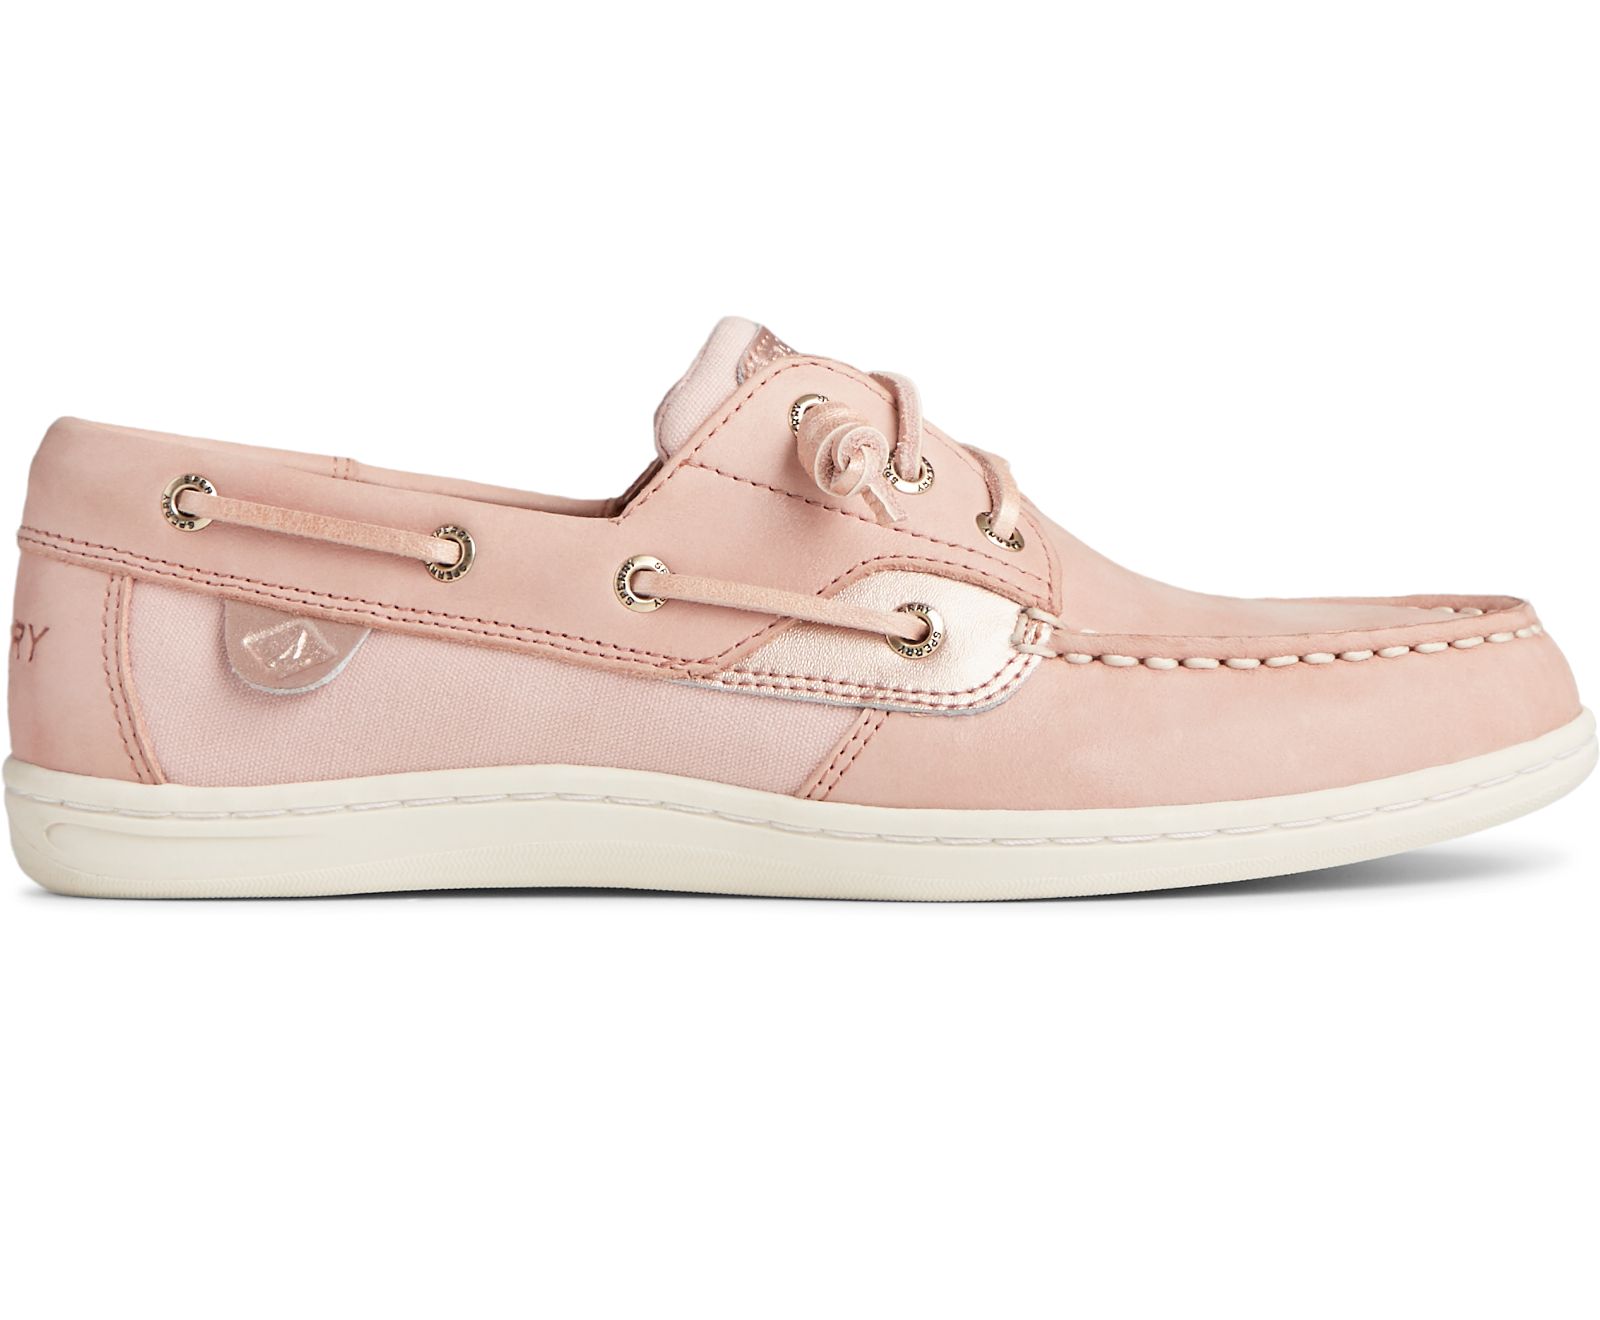 Women's Songfish Starlight Leather Boat Shoe - Blush - Click Image to Close